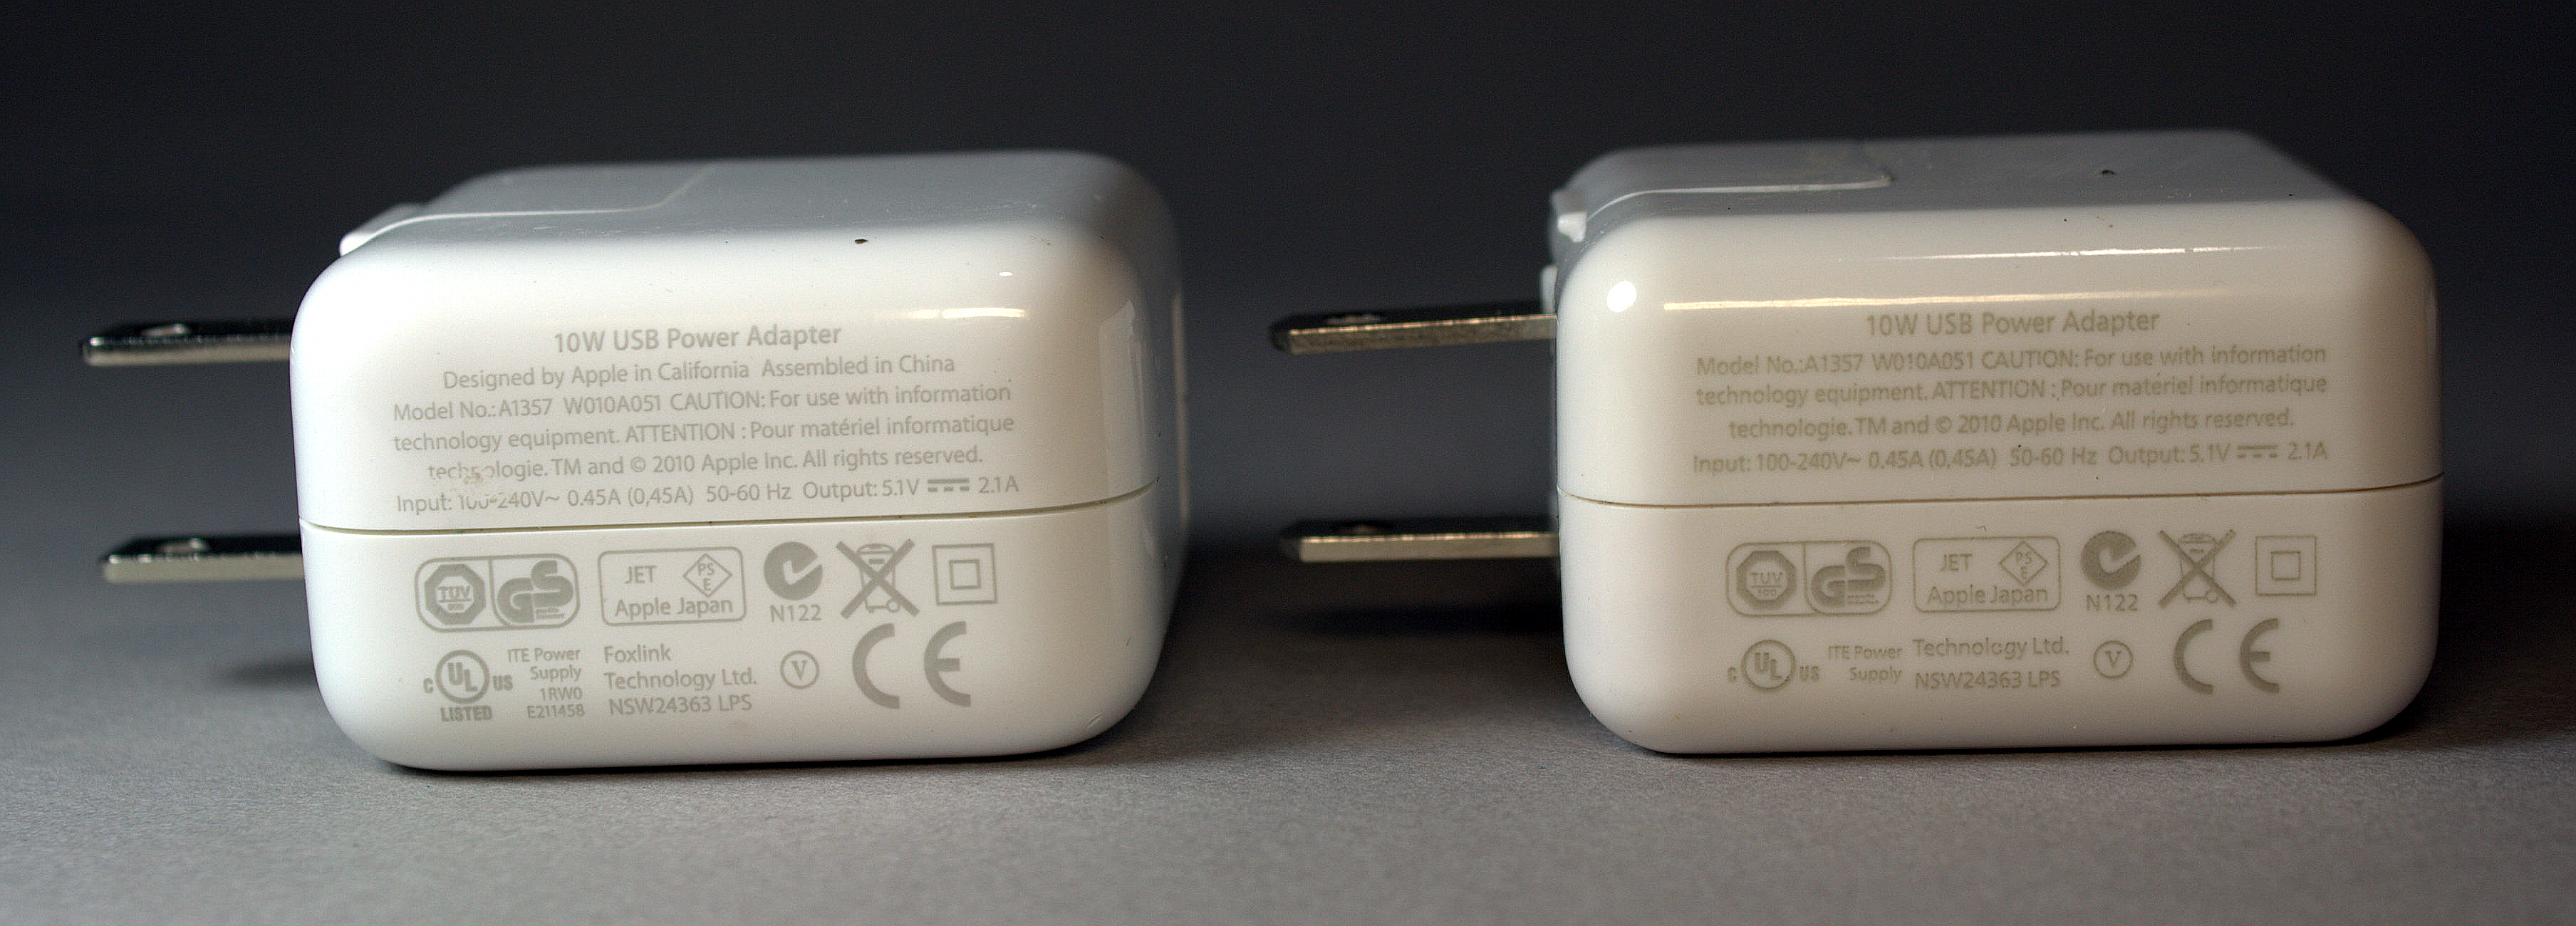 Site lijn periode Zijn bekend iPad charger teardown: inside Apple's charger and a risky phony